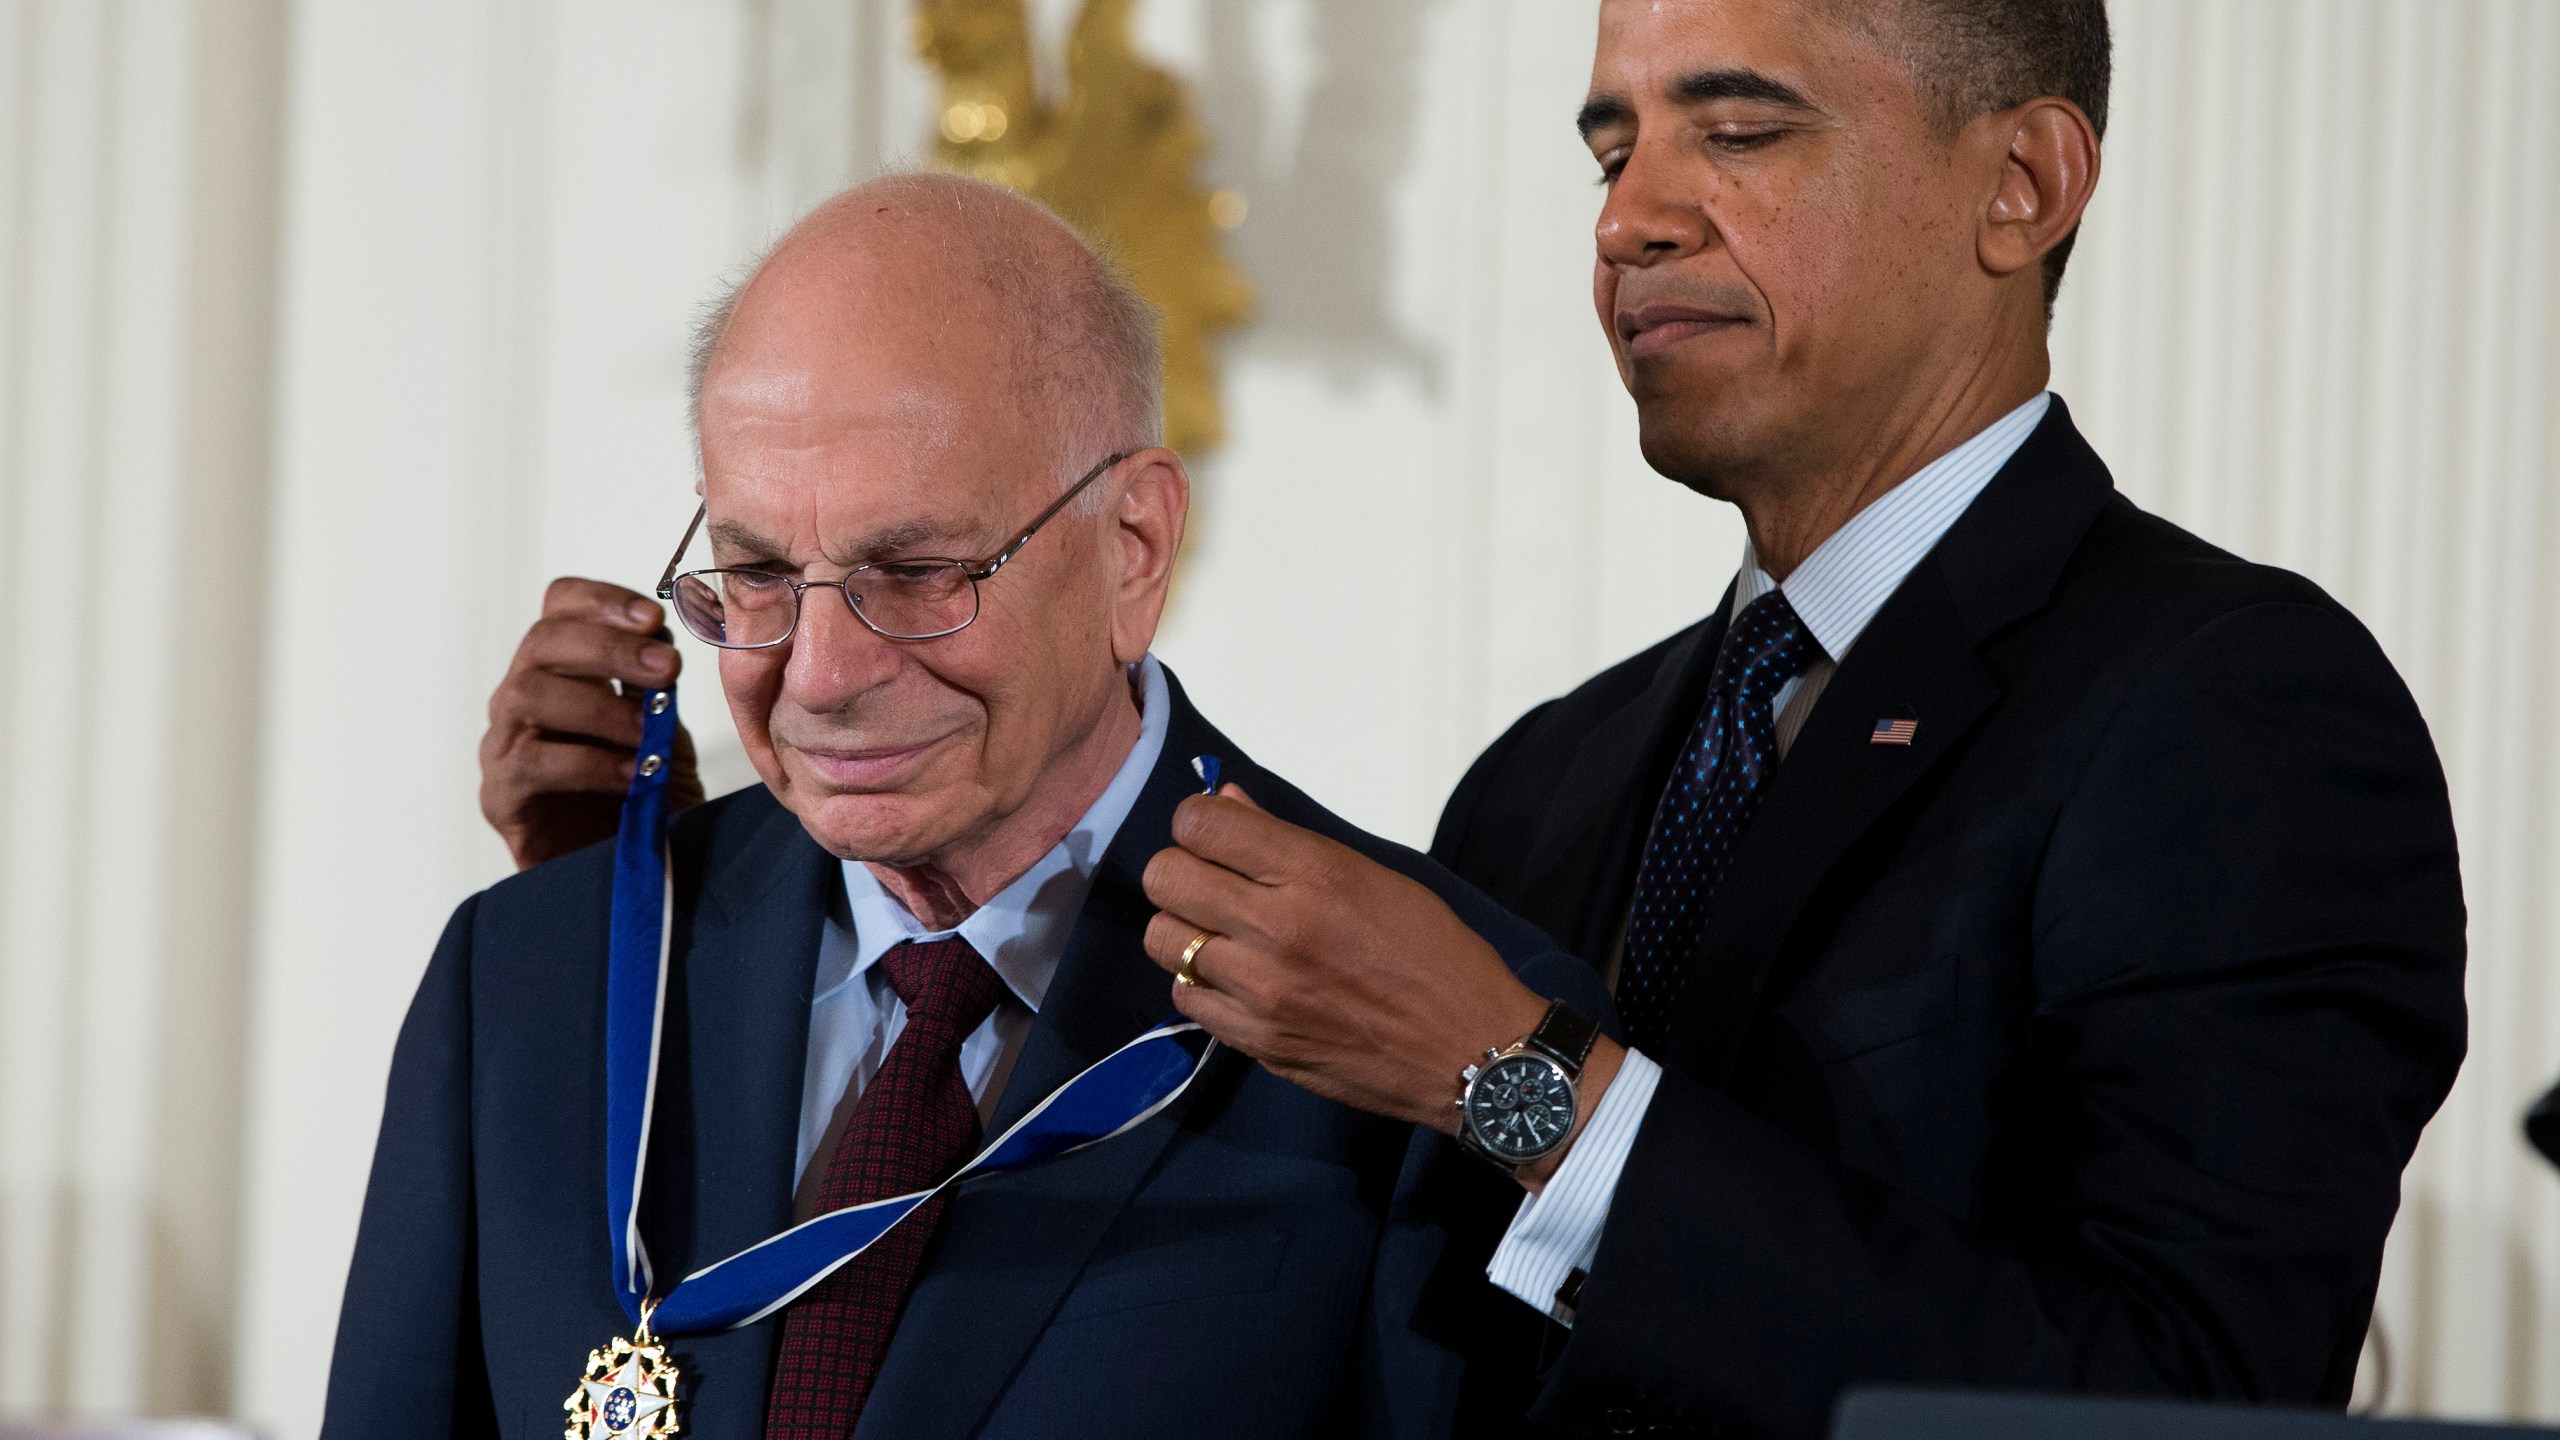 FILE - President Barack Obama awards psychologist Daniel Kahneman with the Presidential Medal of Freedom, Nov. 20, 2013, during a ceremony in the East Room of the White House in Washington. Kahneman, a psychologist who won a Nobel Prize in economics for his insights into how ingrained neurological biases influence decision making, died Wednesday, March 27, 2024, at the age of 90. (AP Photo/Evan Vucci, File)